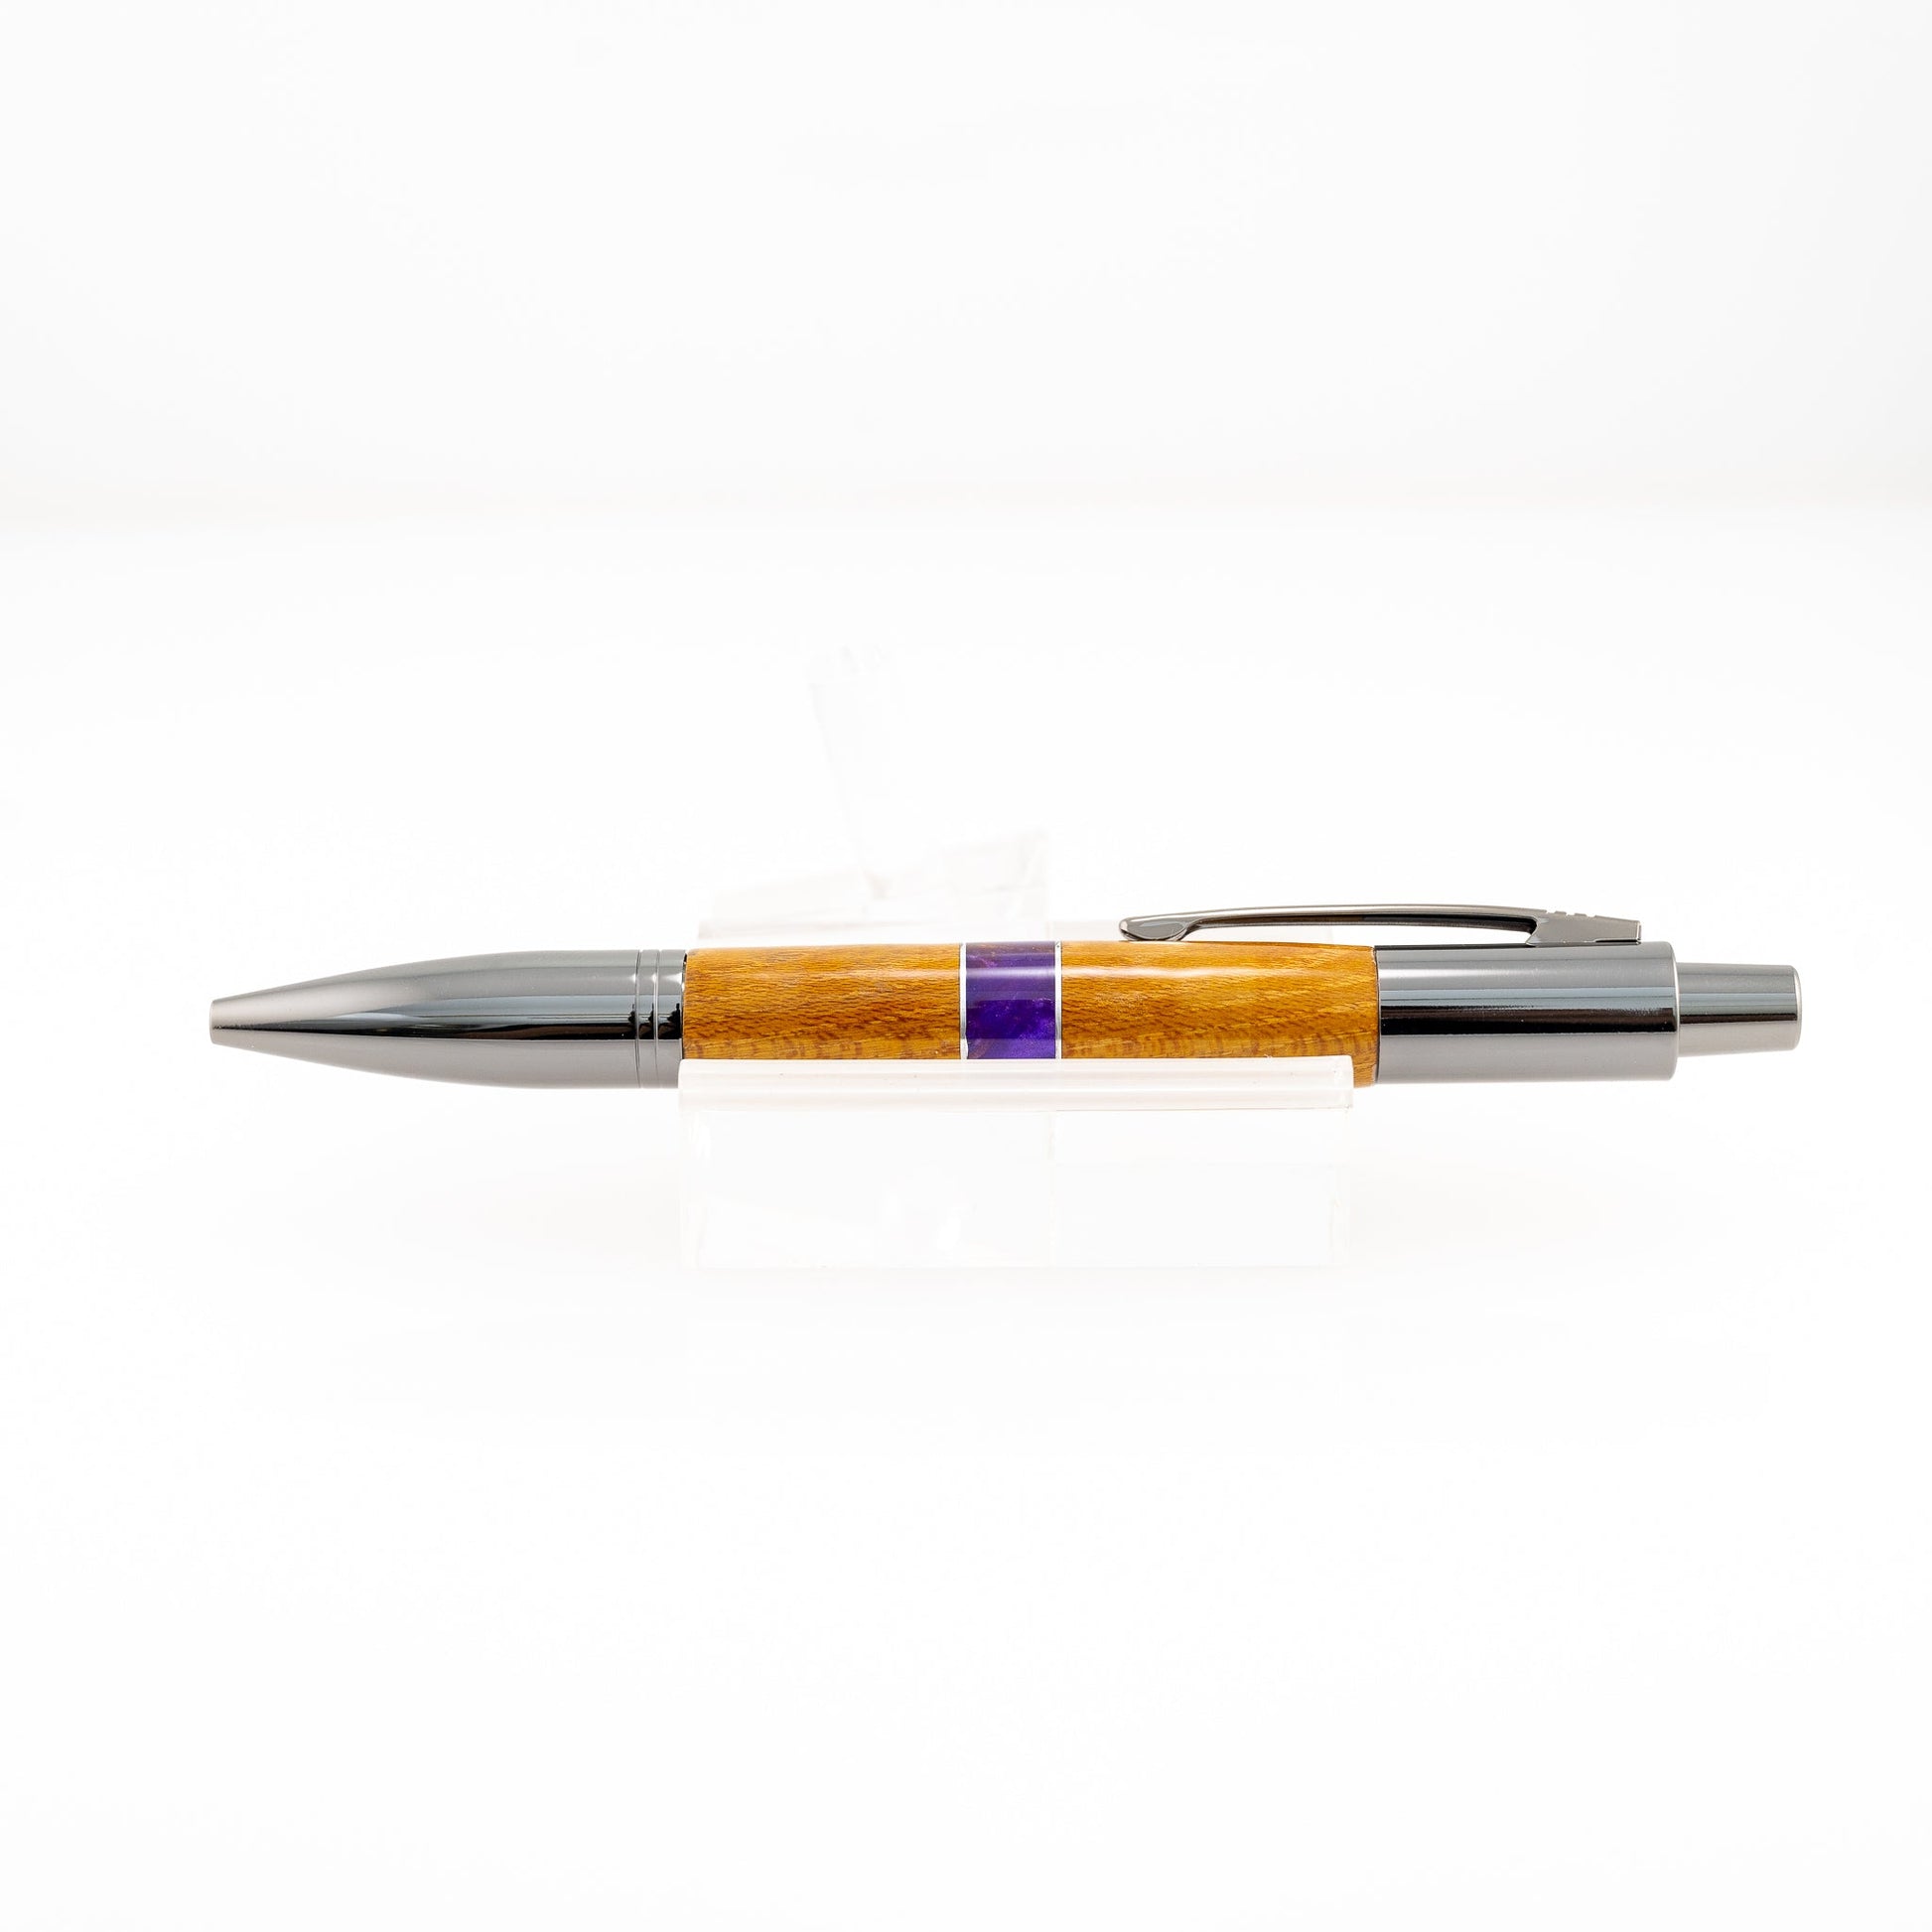 Handmade Osage Orange wood pen with purple segment separated by aluminum bands and gunmetal plating